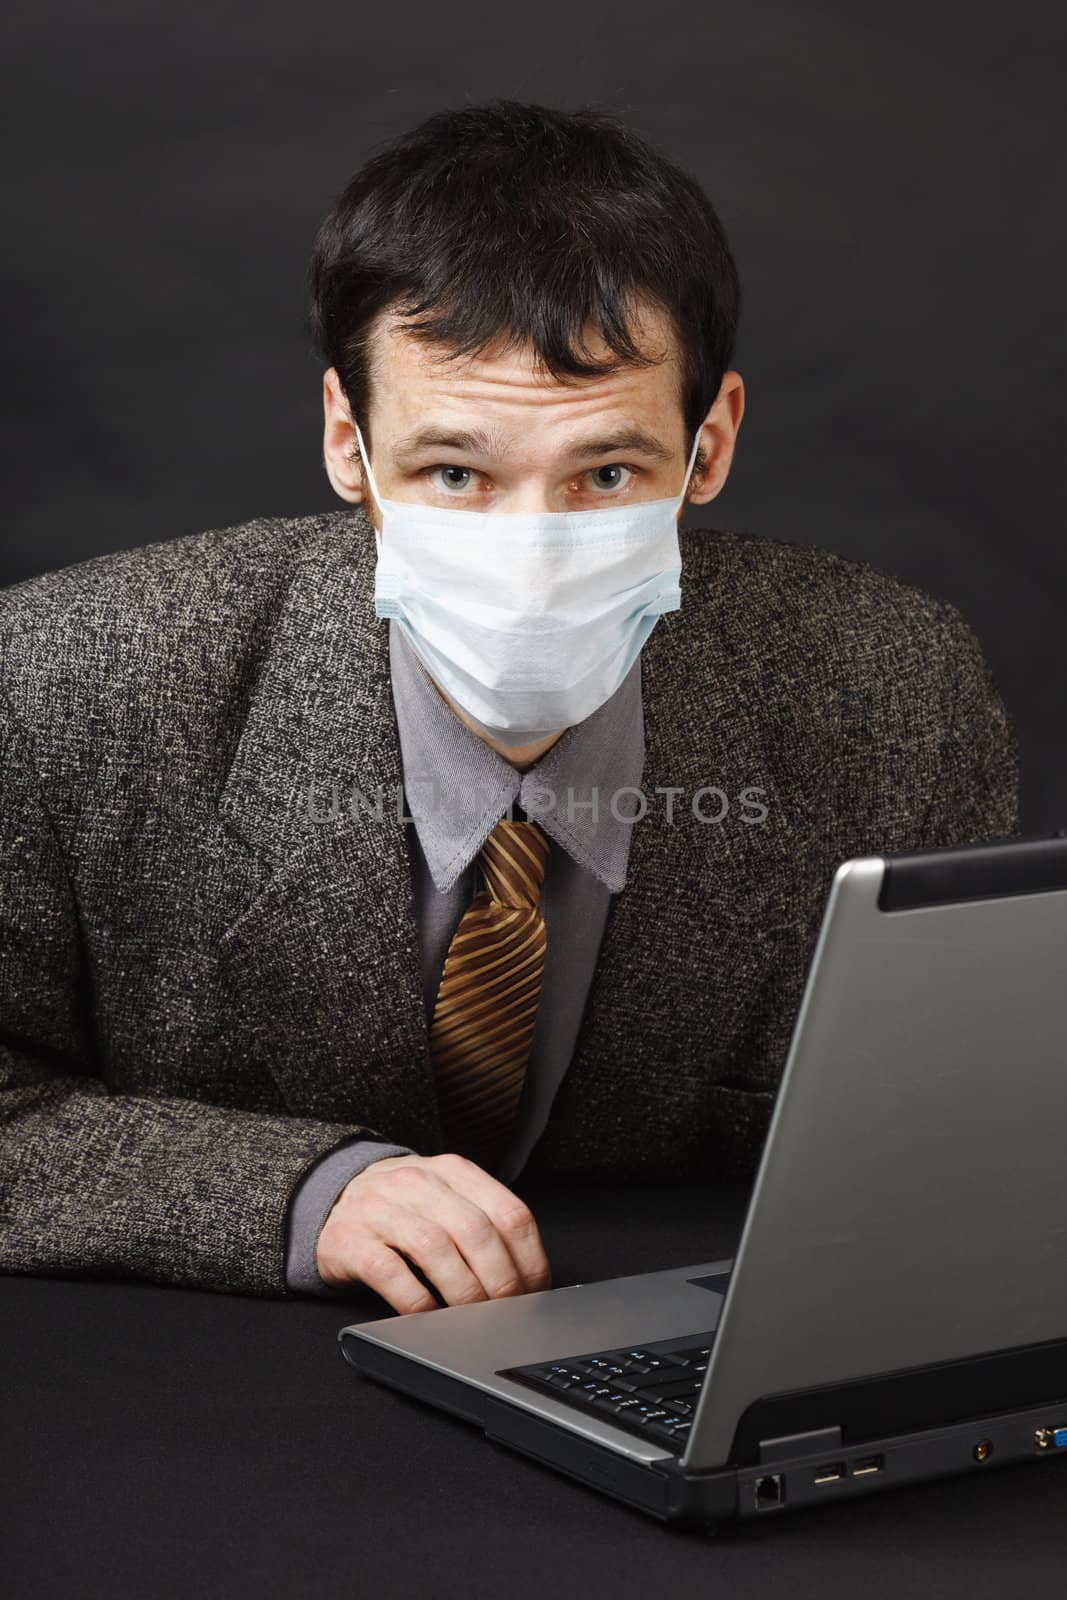 Man in medical mask works in Internet by pzaxe